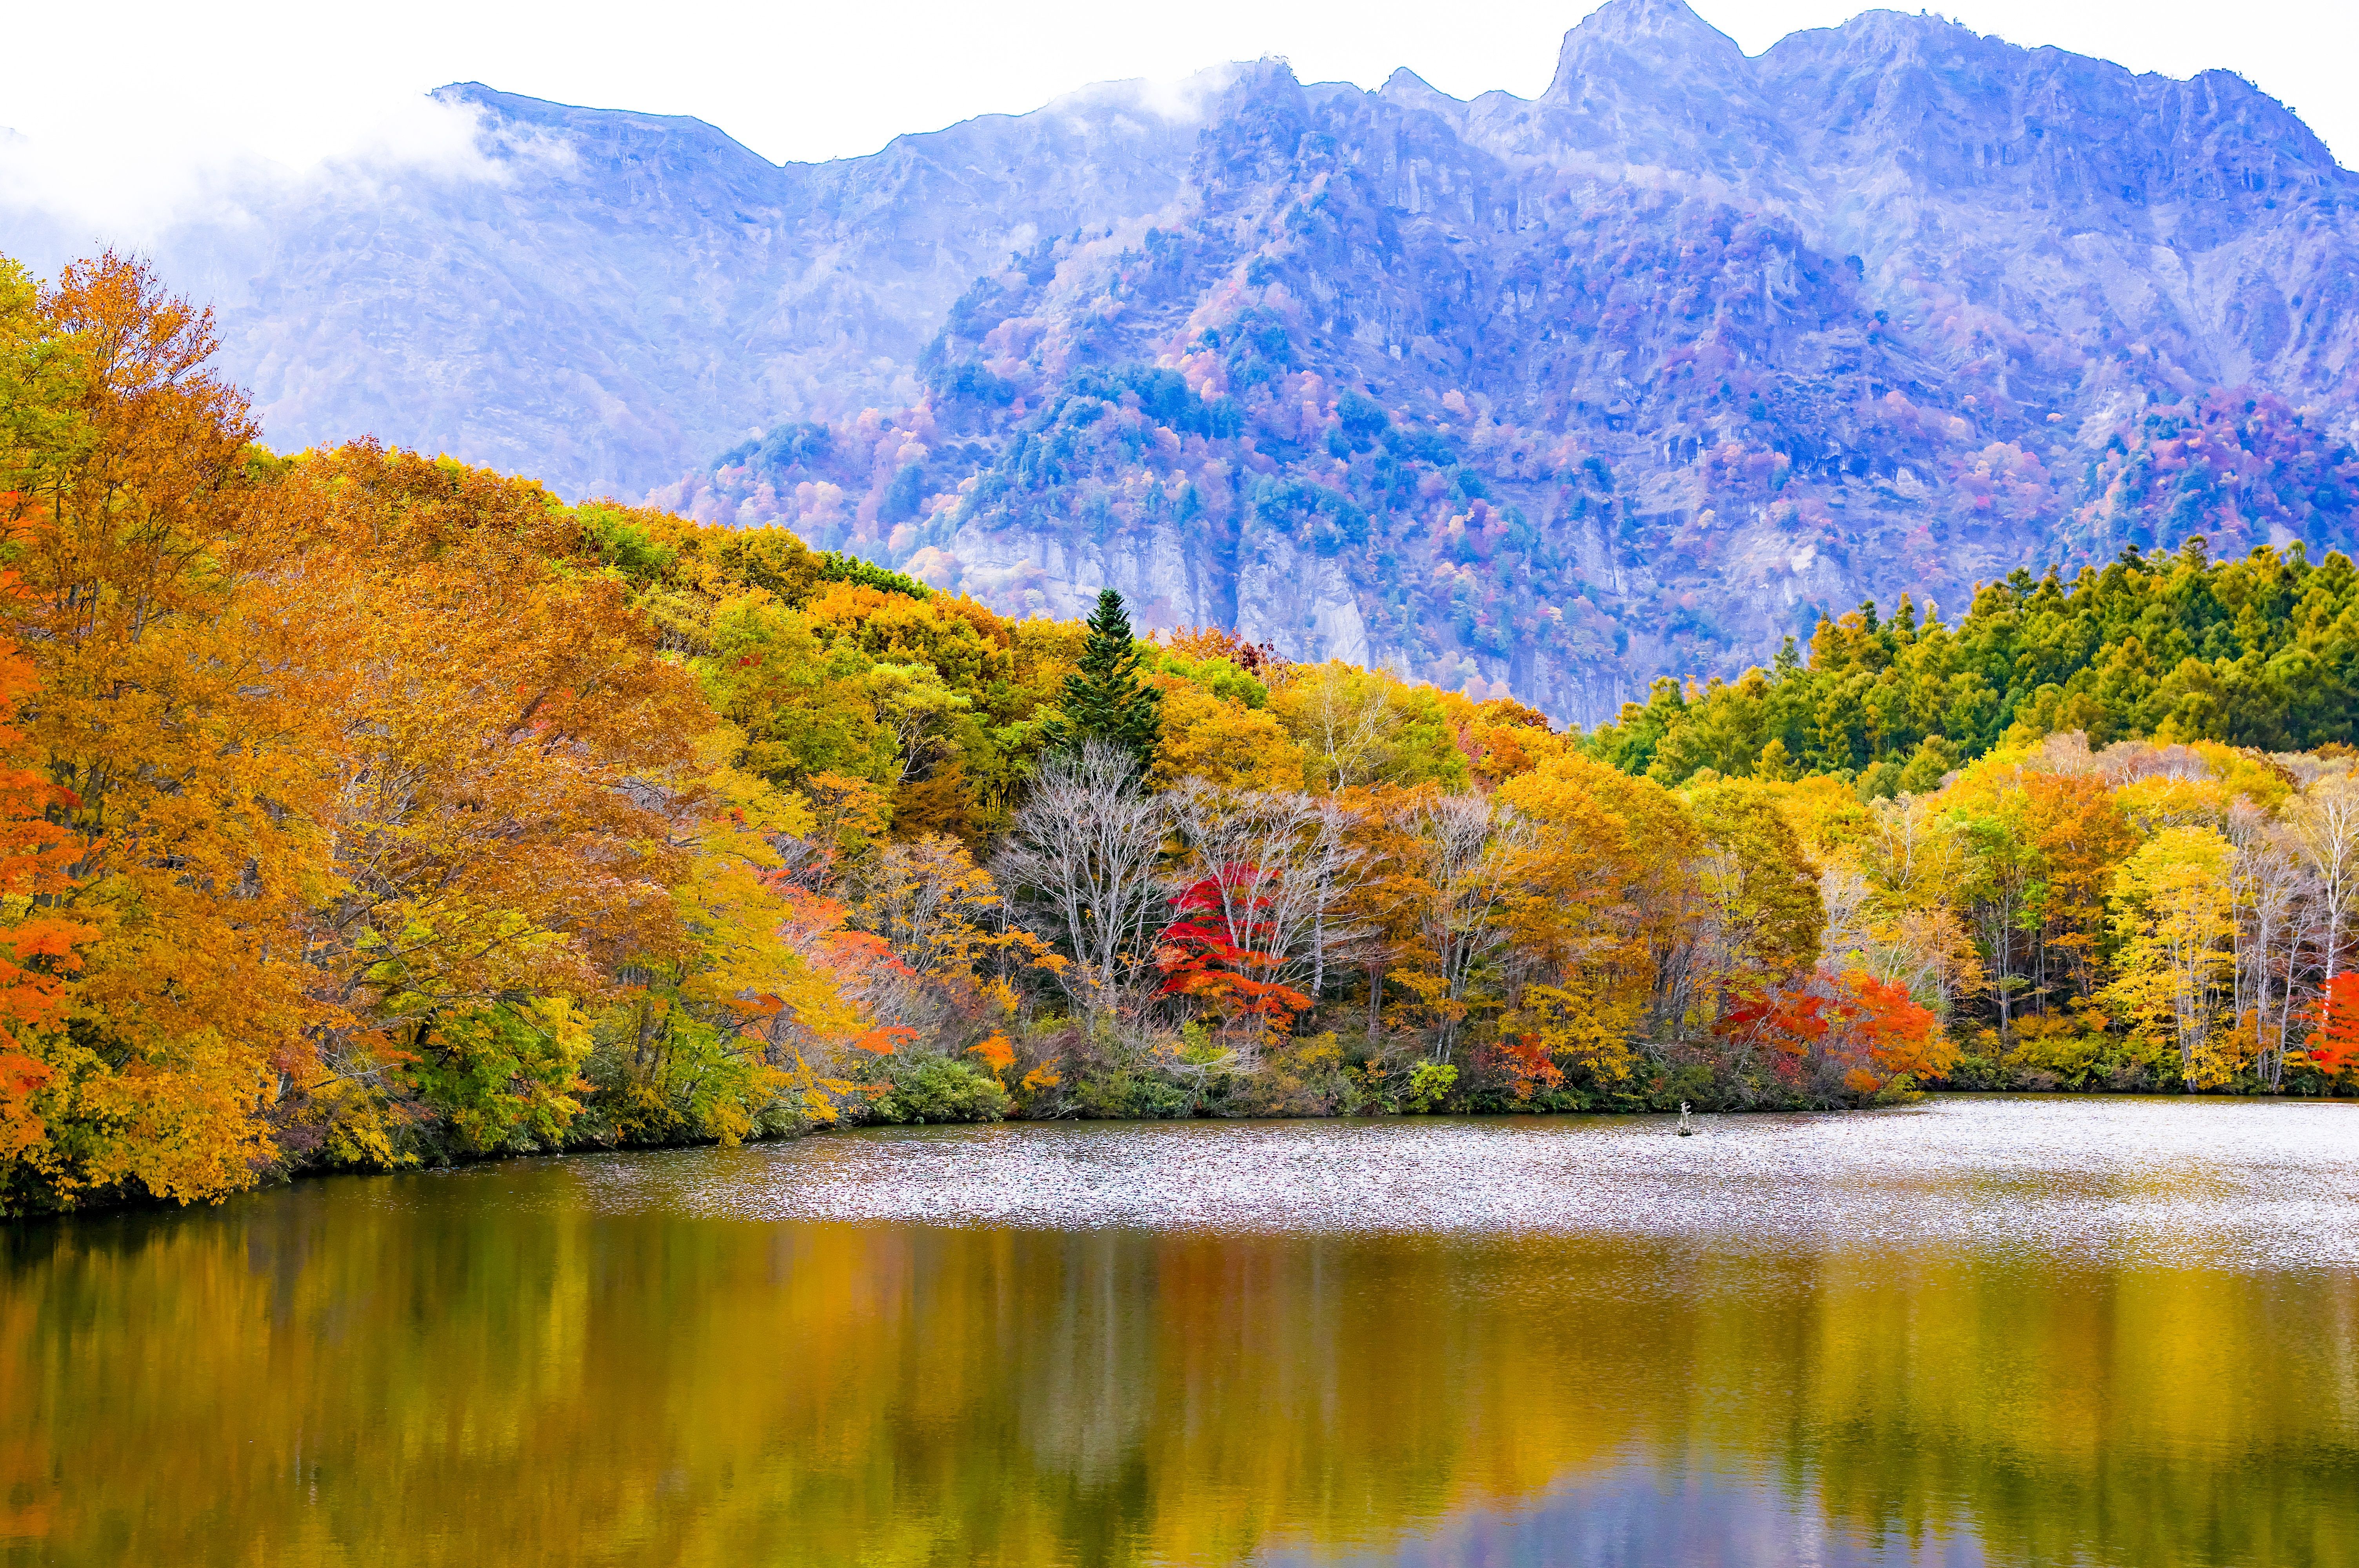 Autumn forest by the lake against the backdrop of the mountain, Japan Desktop wallpaper 1680x1050